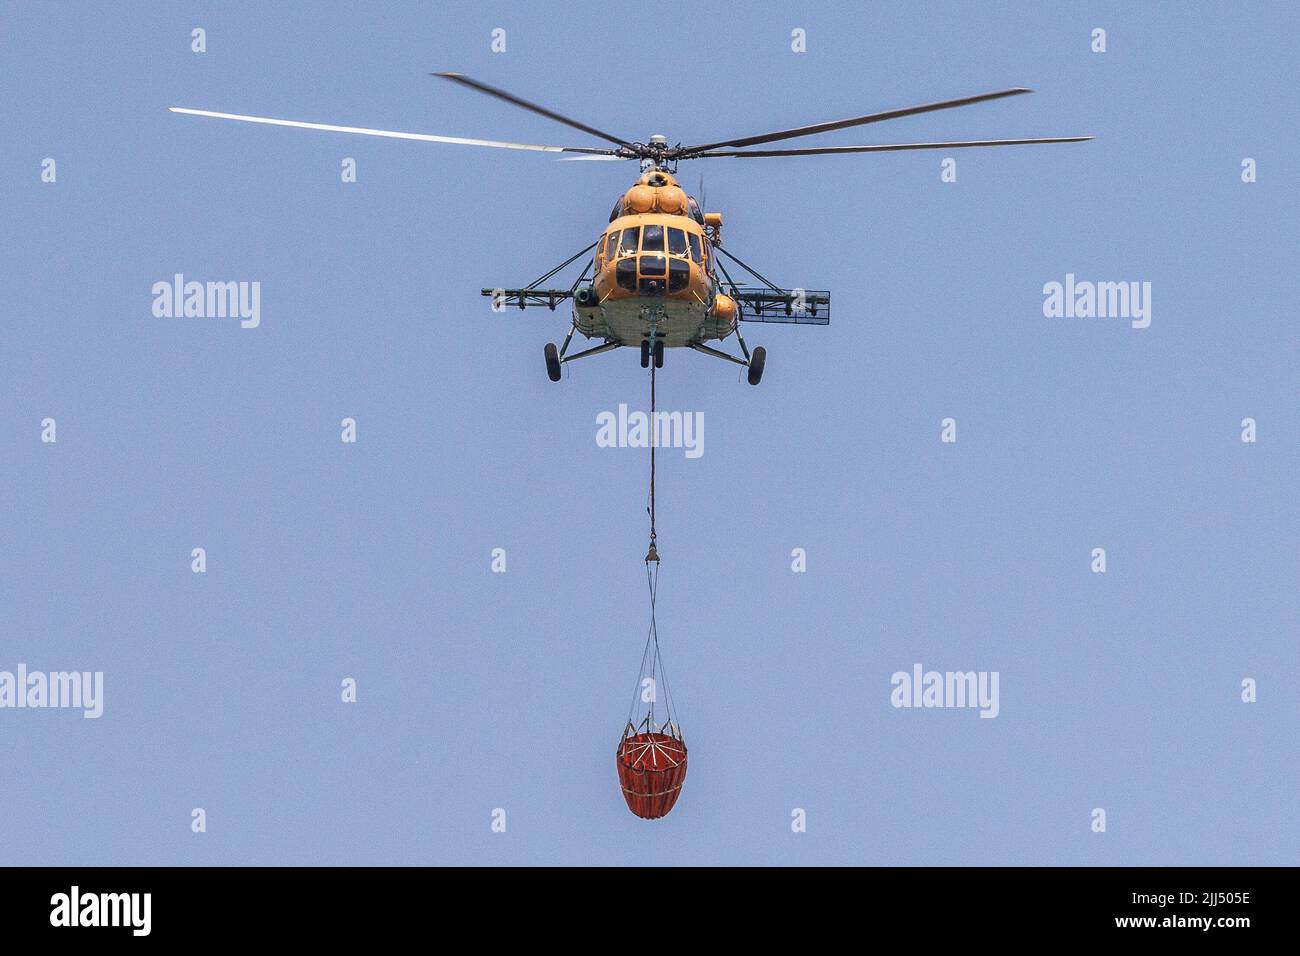 A Hungarian Mil Mi-17 helicopter carries a Bambi bucket for extinguishing fires as it flies over a large wildfire that burns near the village of Temnica in the Karst region of Slovenia. About a thousand firemen with air support from three Slovenian helicopters, two Serbian helicopters, an Austrian helicopter, a Slovakian Black Hawk helicopter and two Hungarian helicopters, a Croatian Canadair firefighting airplane and a Slovenian army Pilatus airplane continued battling a large wildfire that broke out five days ago and has intensified in the Karst region of Slovenia. Villages in the area were Stock Photo